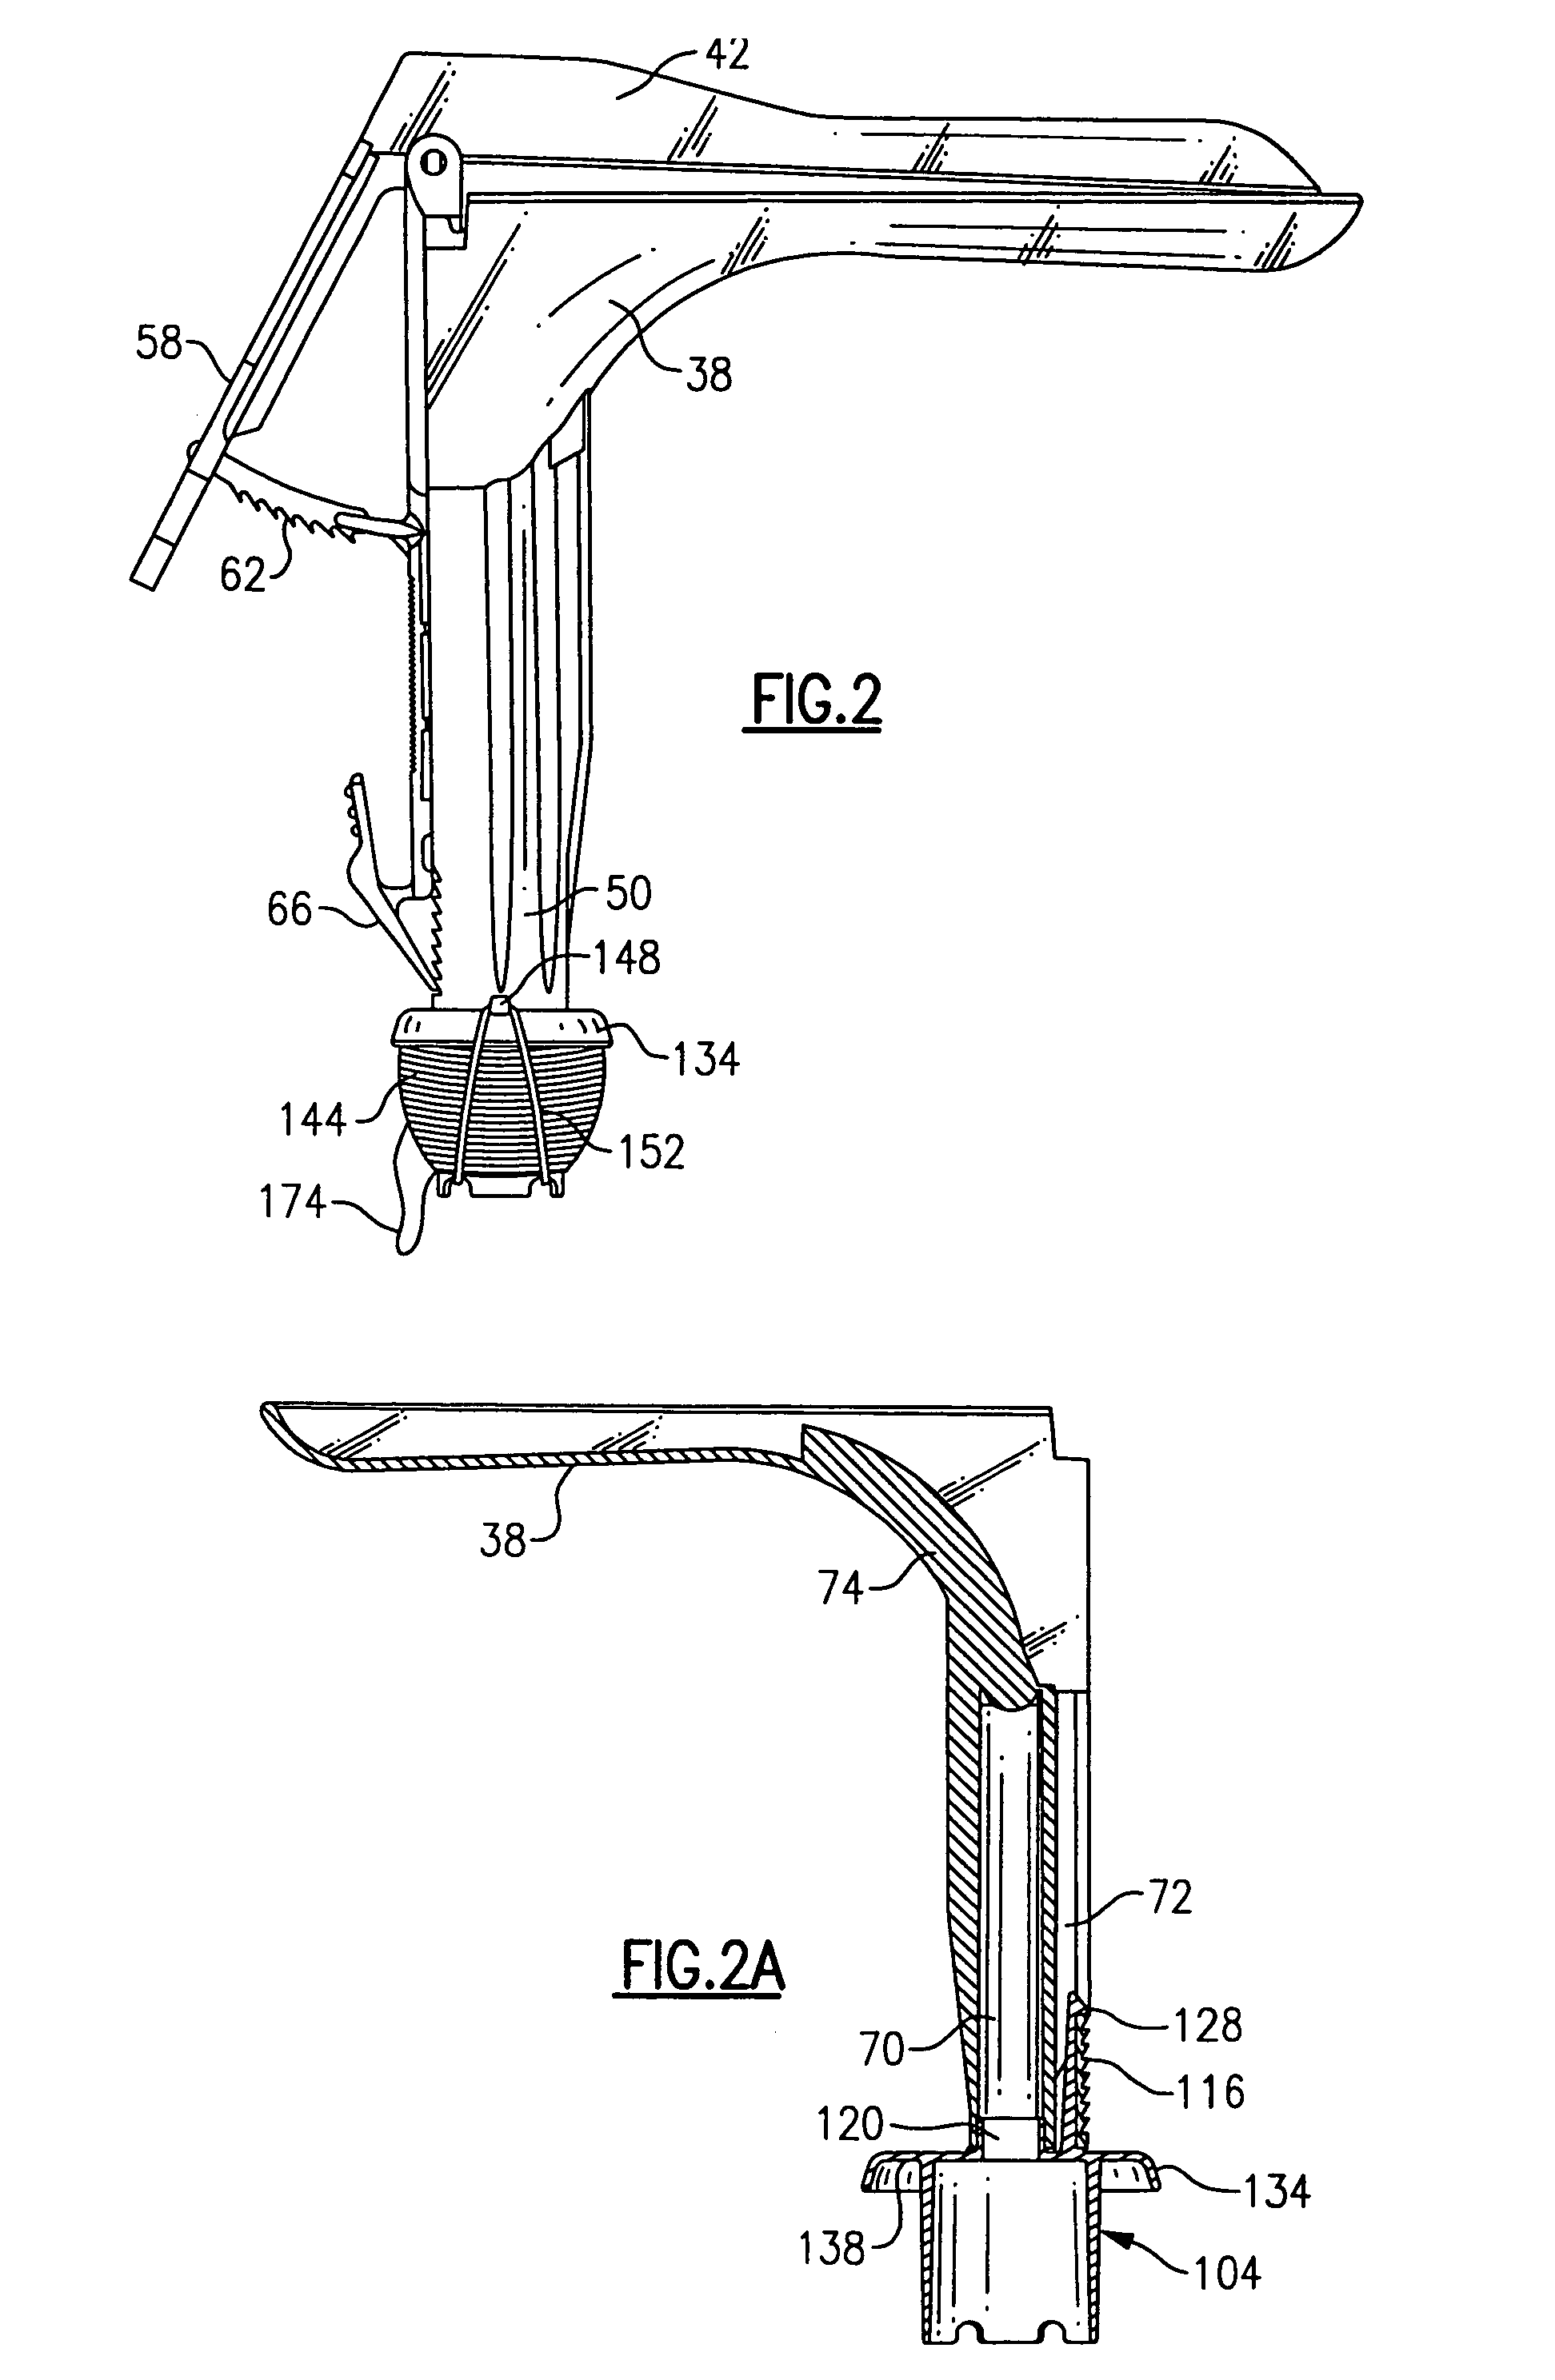 Protective sheath for illumination assembly of a disposable vaginal speculum